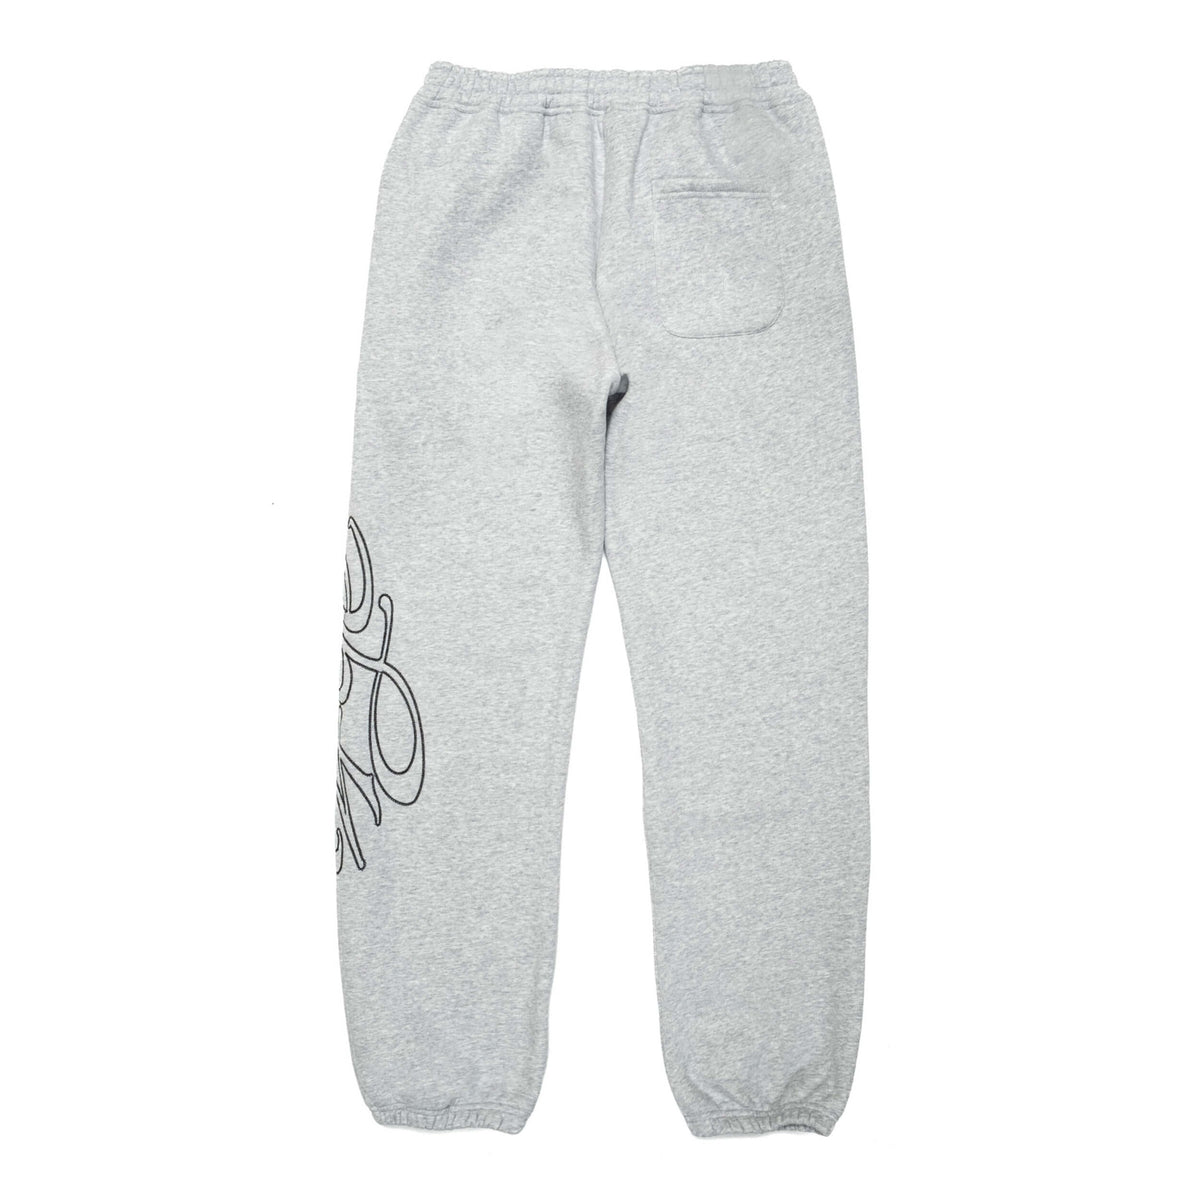 Back view of signature logo cuff pant in grey, showcasing contrast chain stitched 4YE logo on lower left leg, and back pocket detail on back right side.